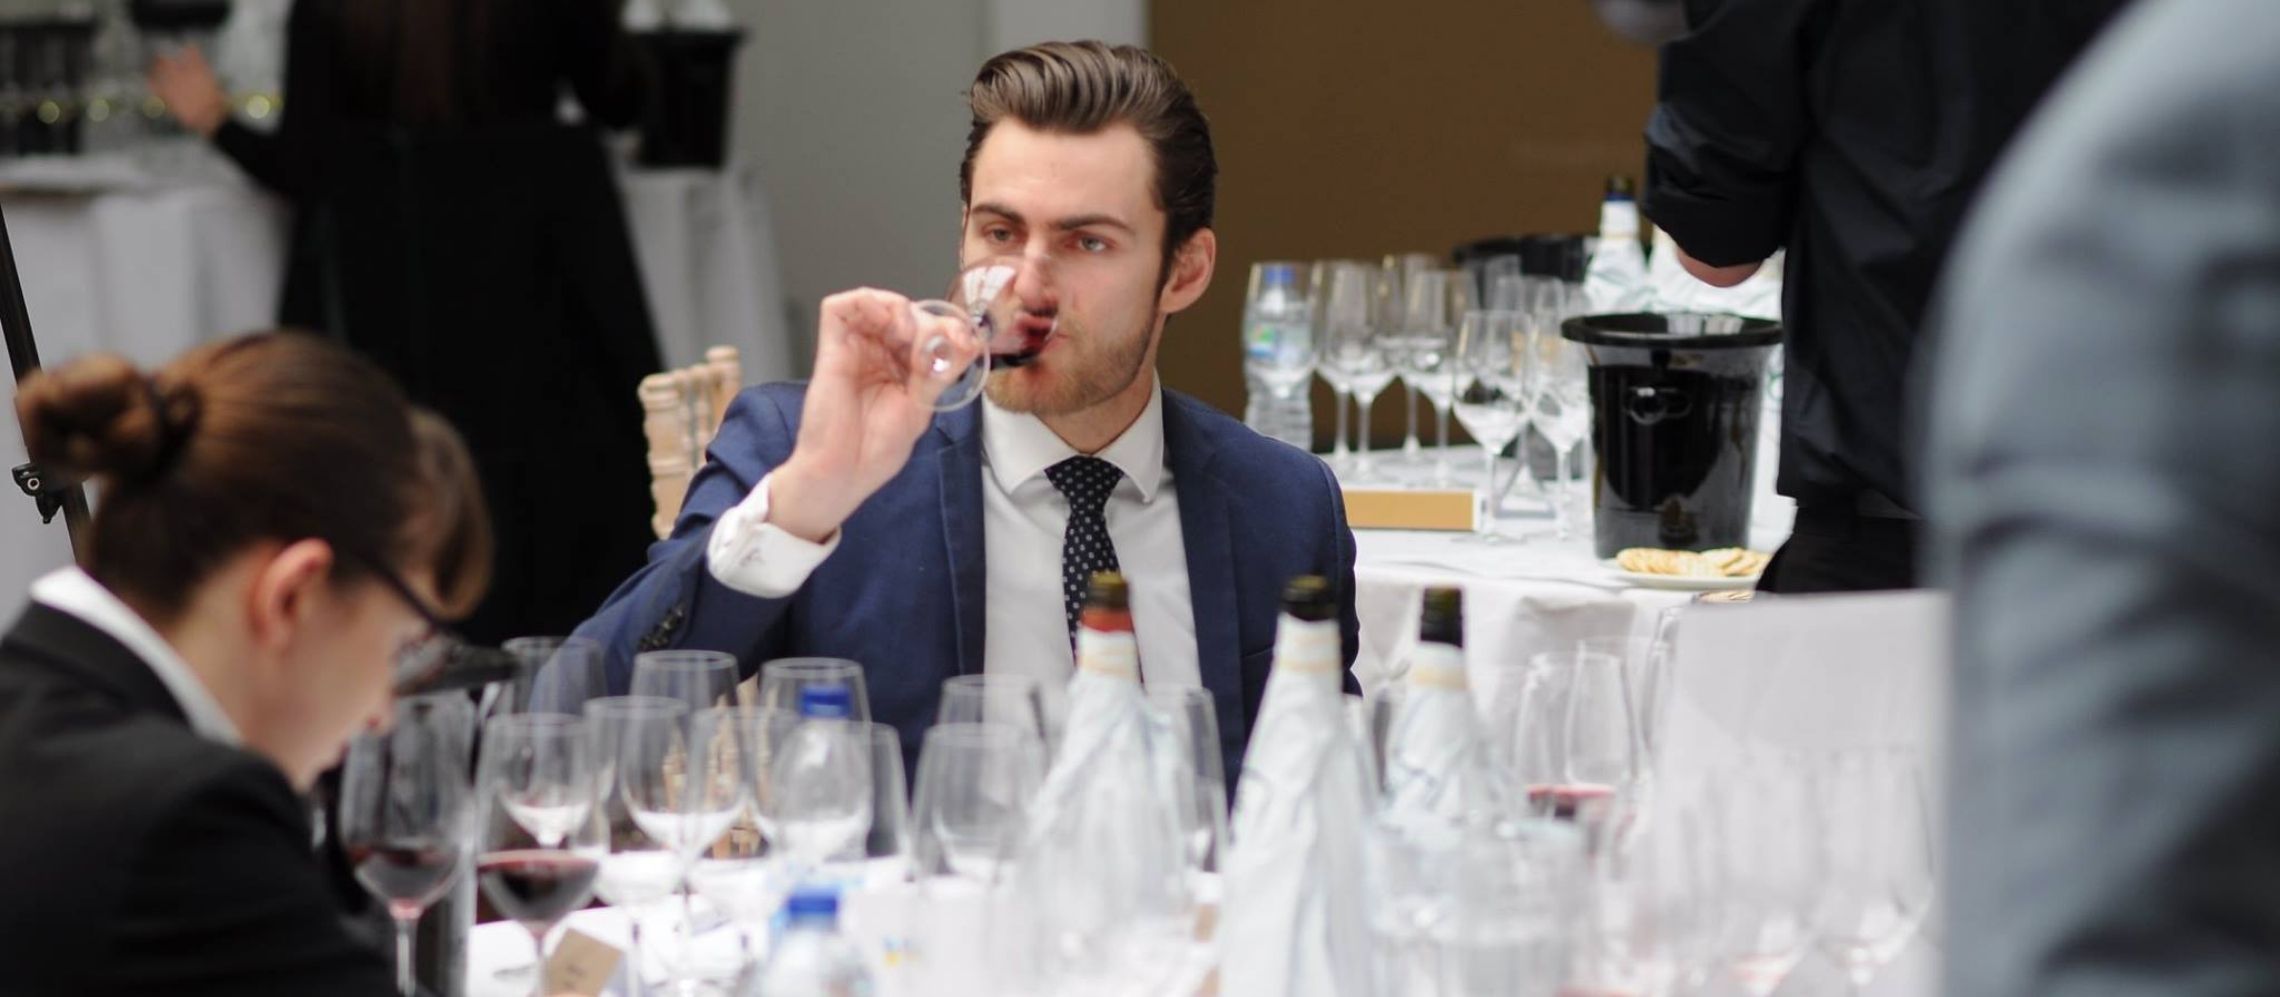 Photo for: Final Call For The London Wine Competition Is Here 